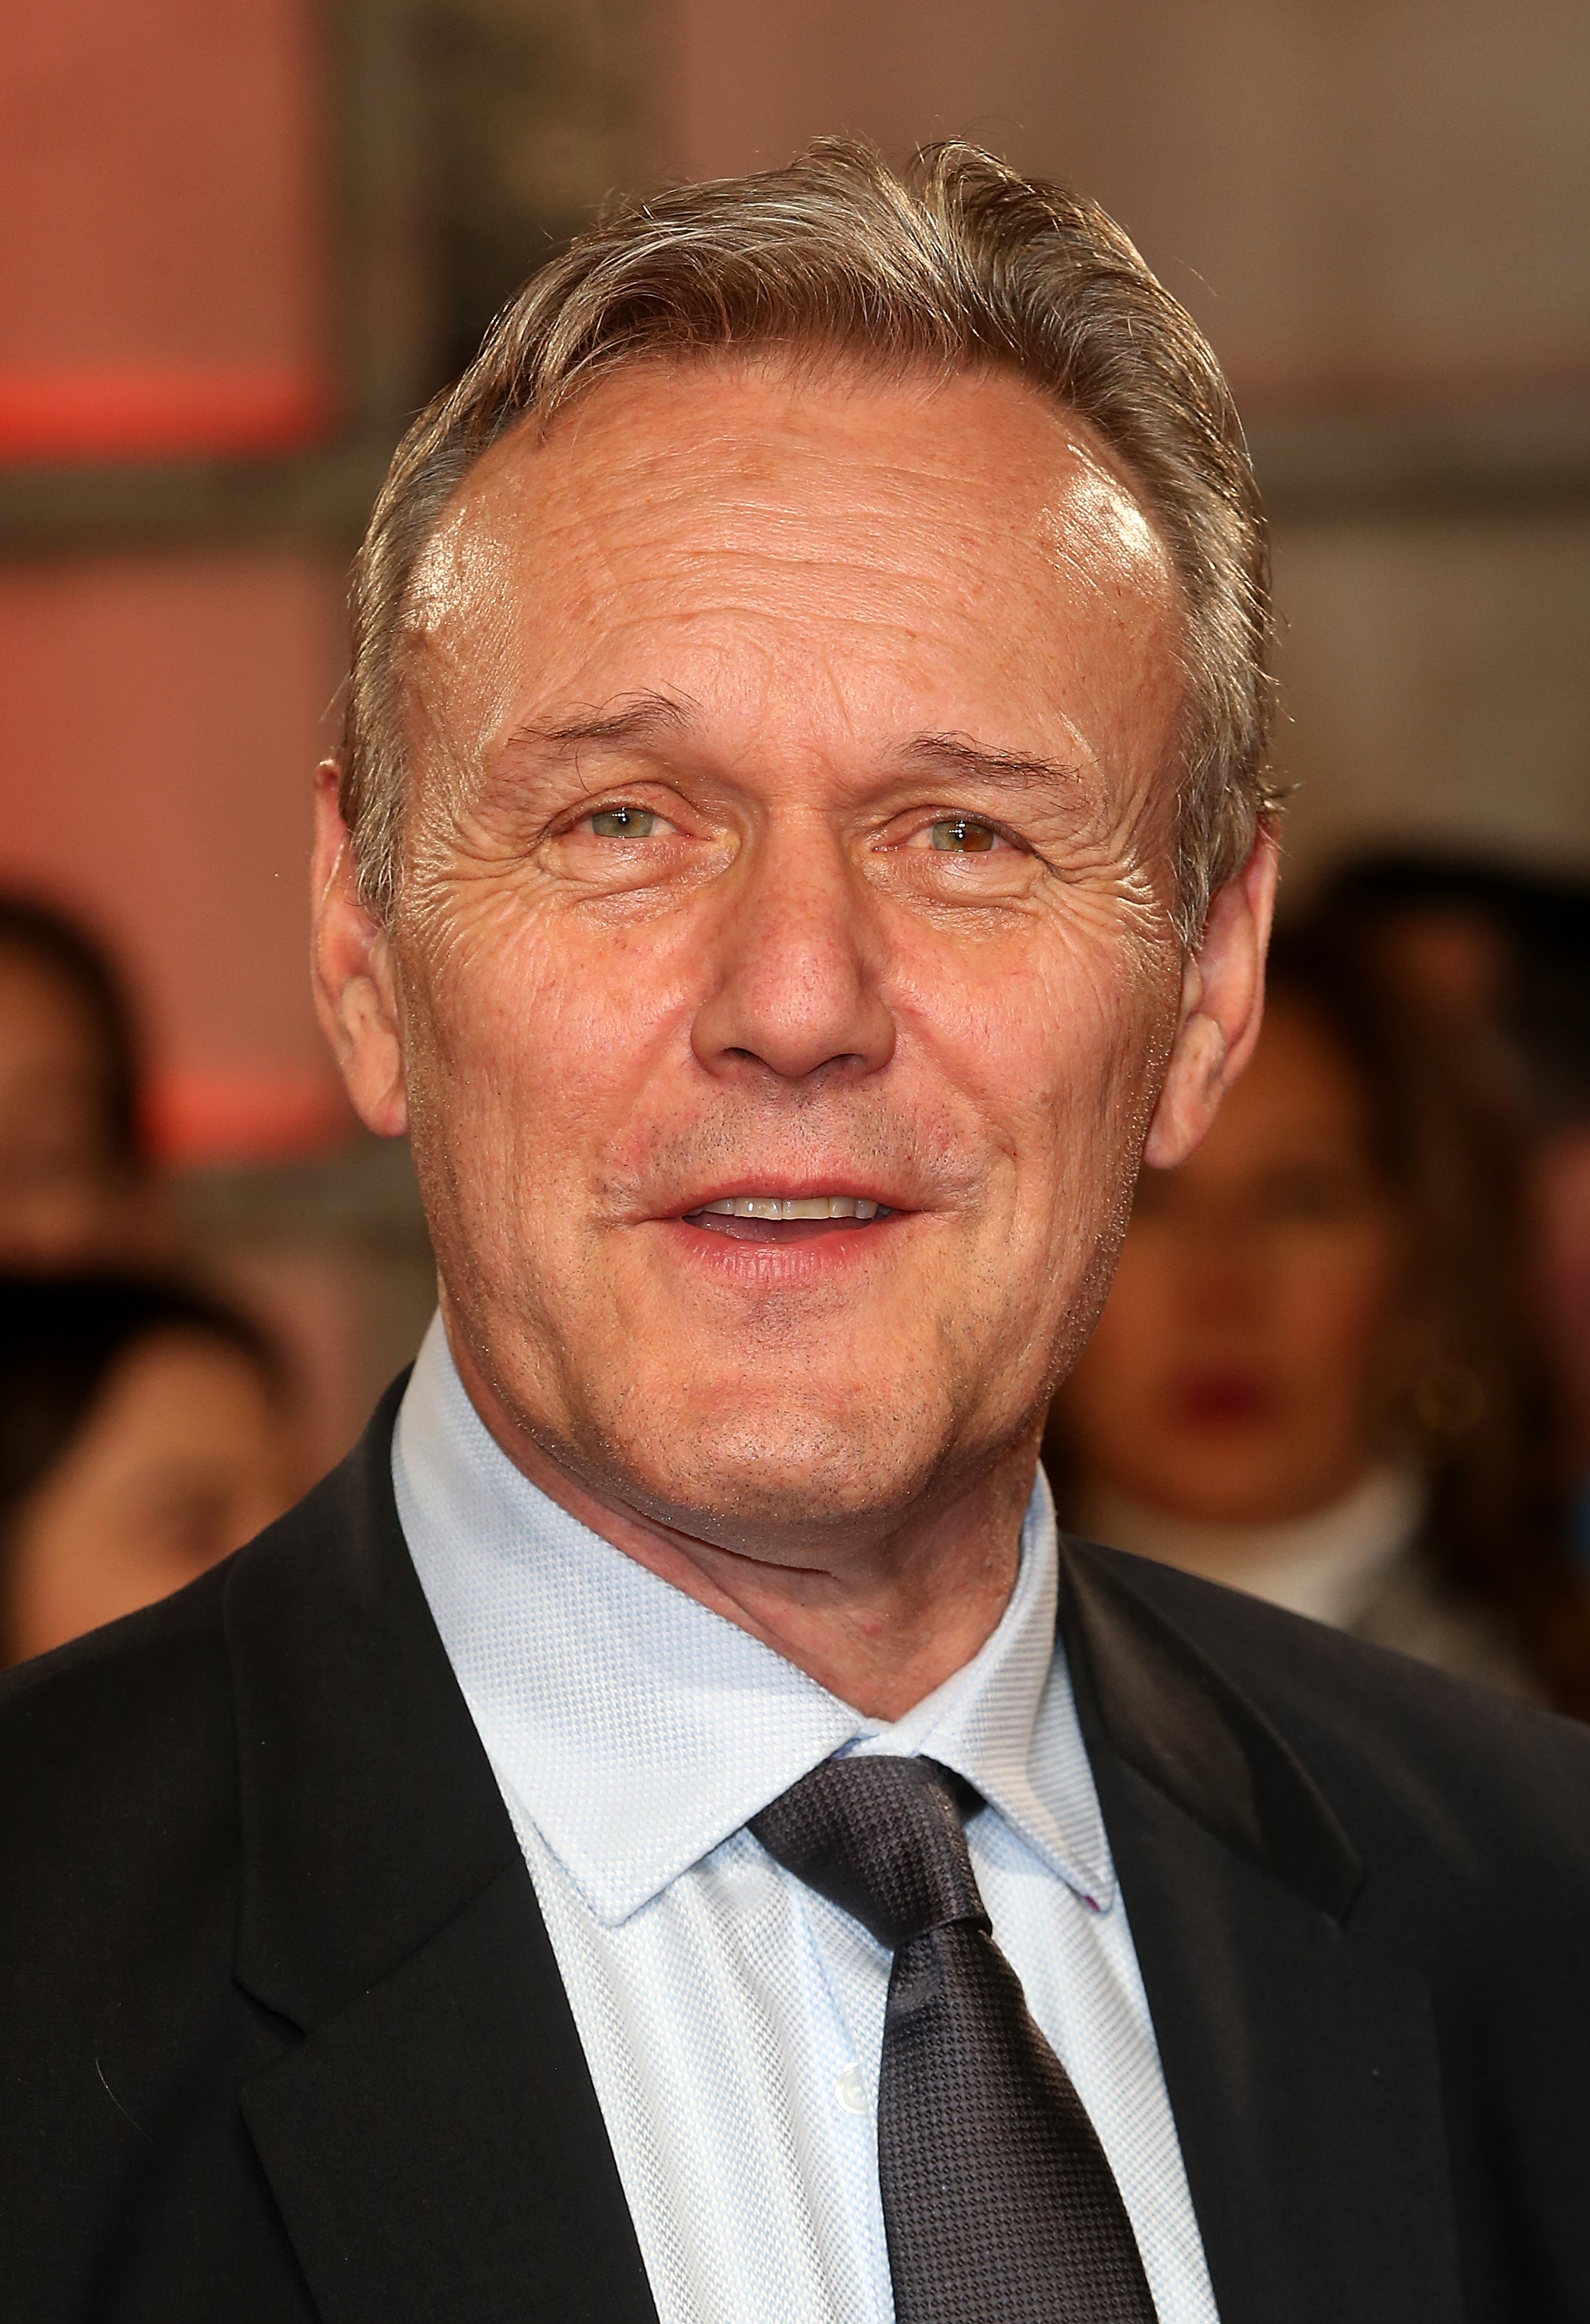 Anthony Head attends UK Premiere of "A Street Cat Named Bob" in aid of Action On Addiction on November 3, 2016, in London, United Kingdom. | Source: Getty Images